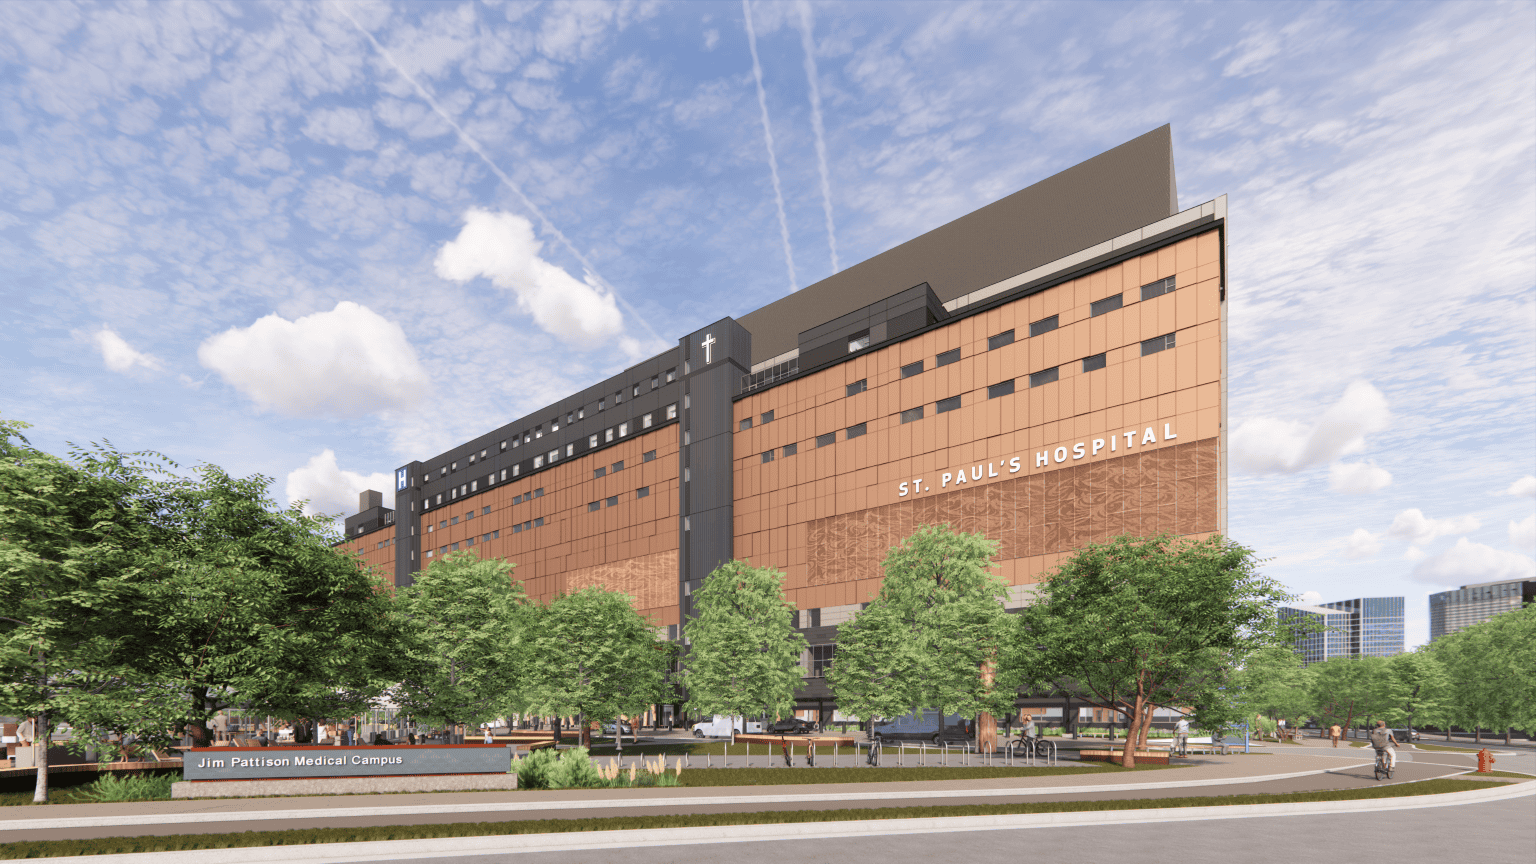 Rendering of the new St. Paul's Hospital